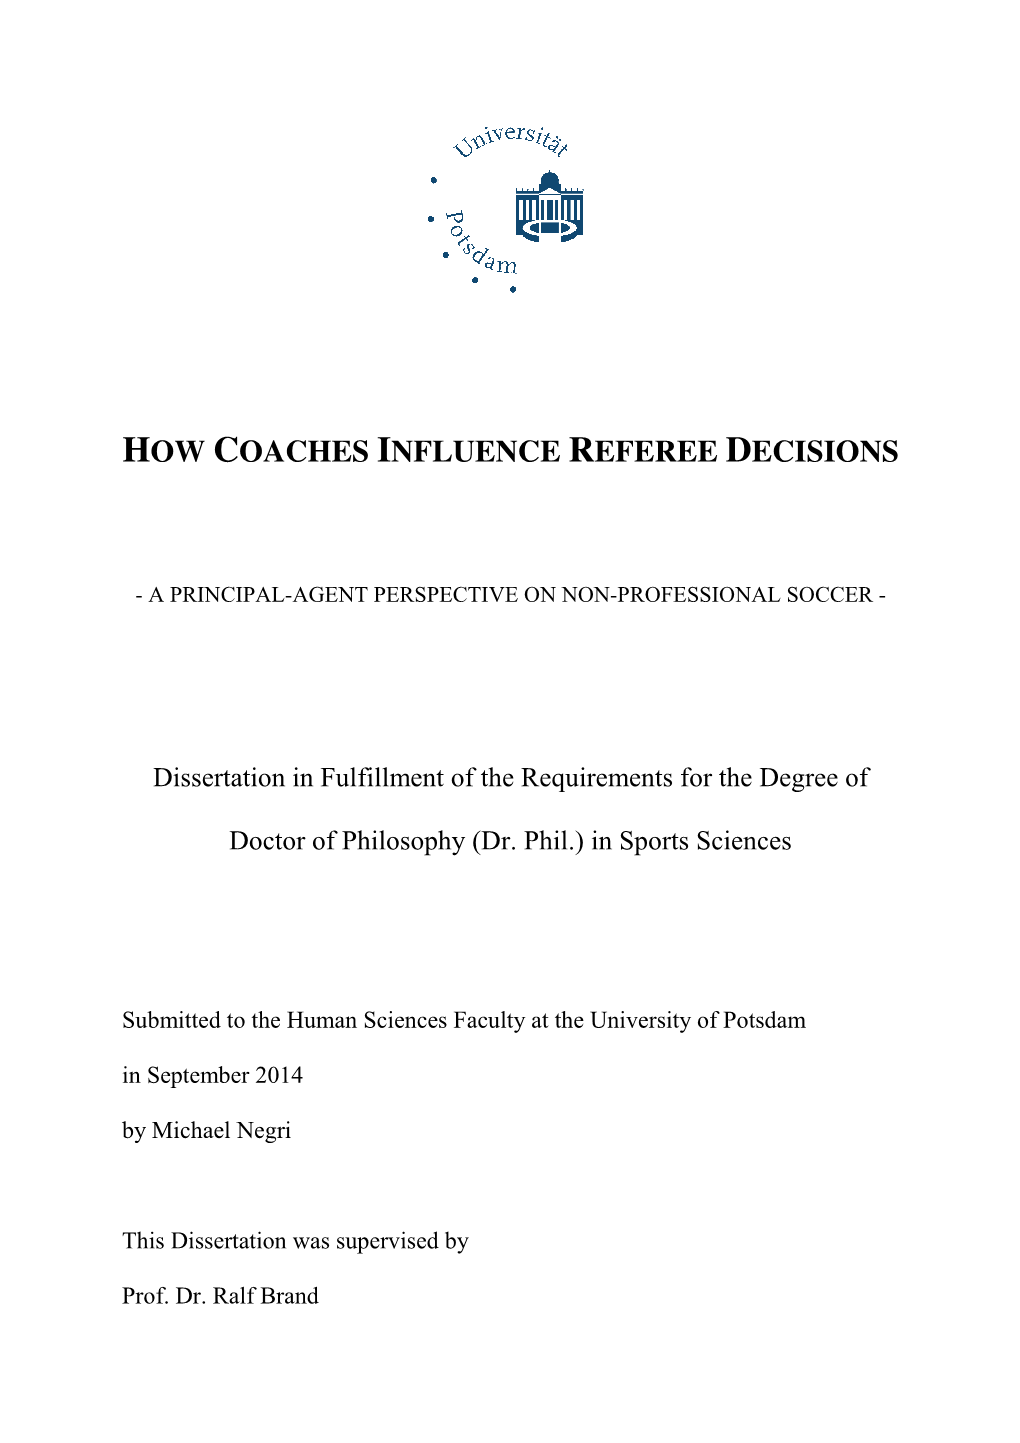 How Coaches Influence Referee Decisions